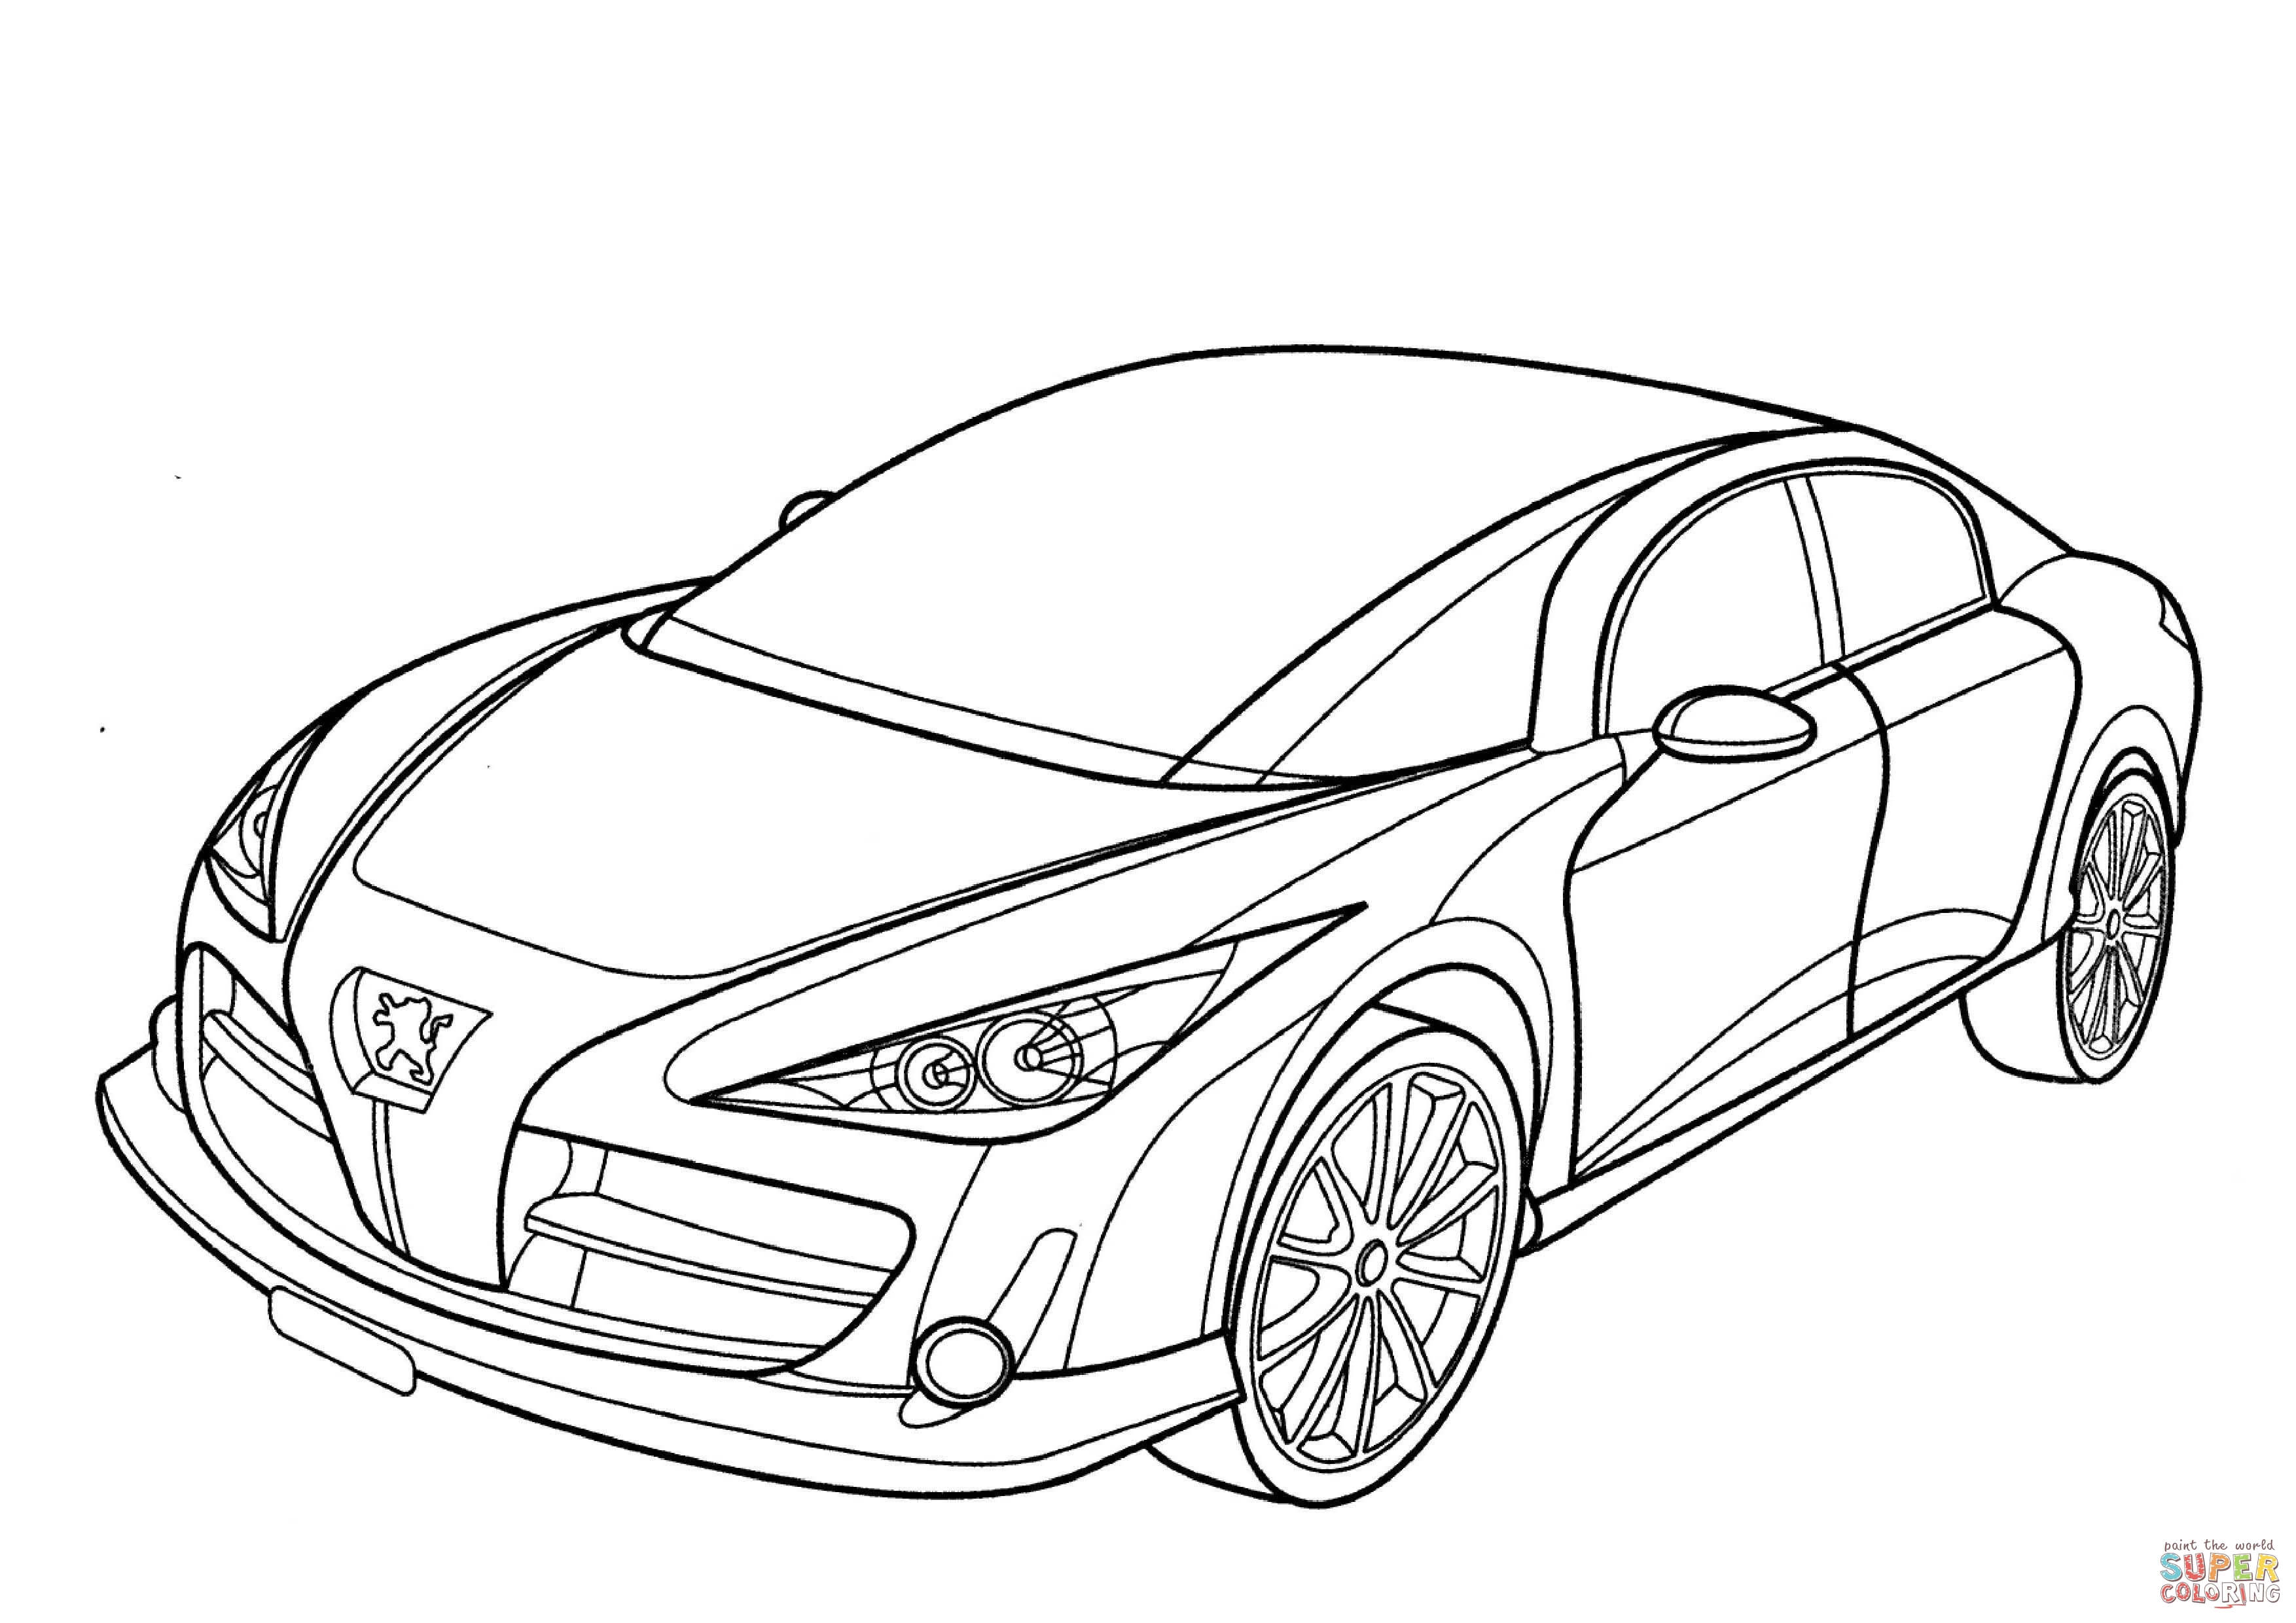 Peugeot RC coloring page | Free ...